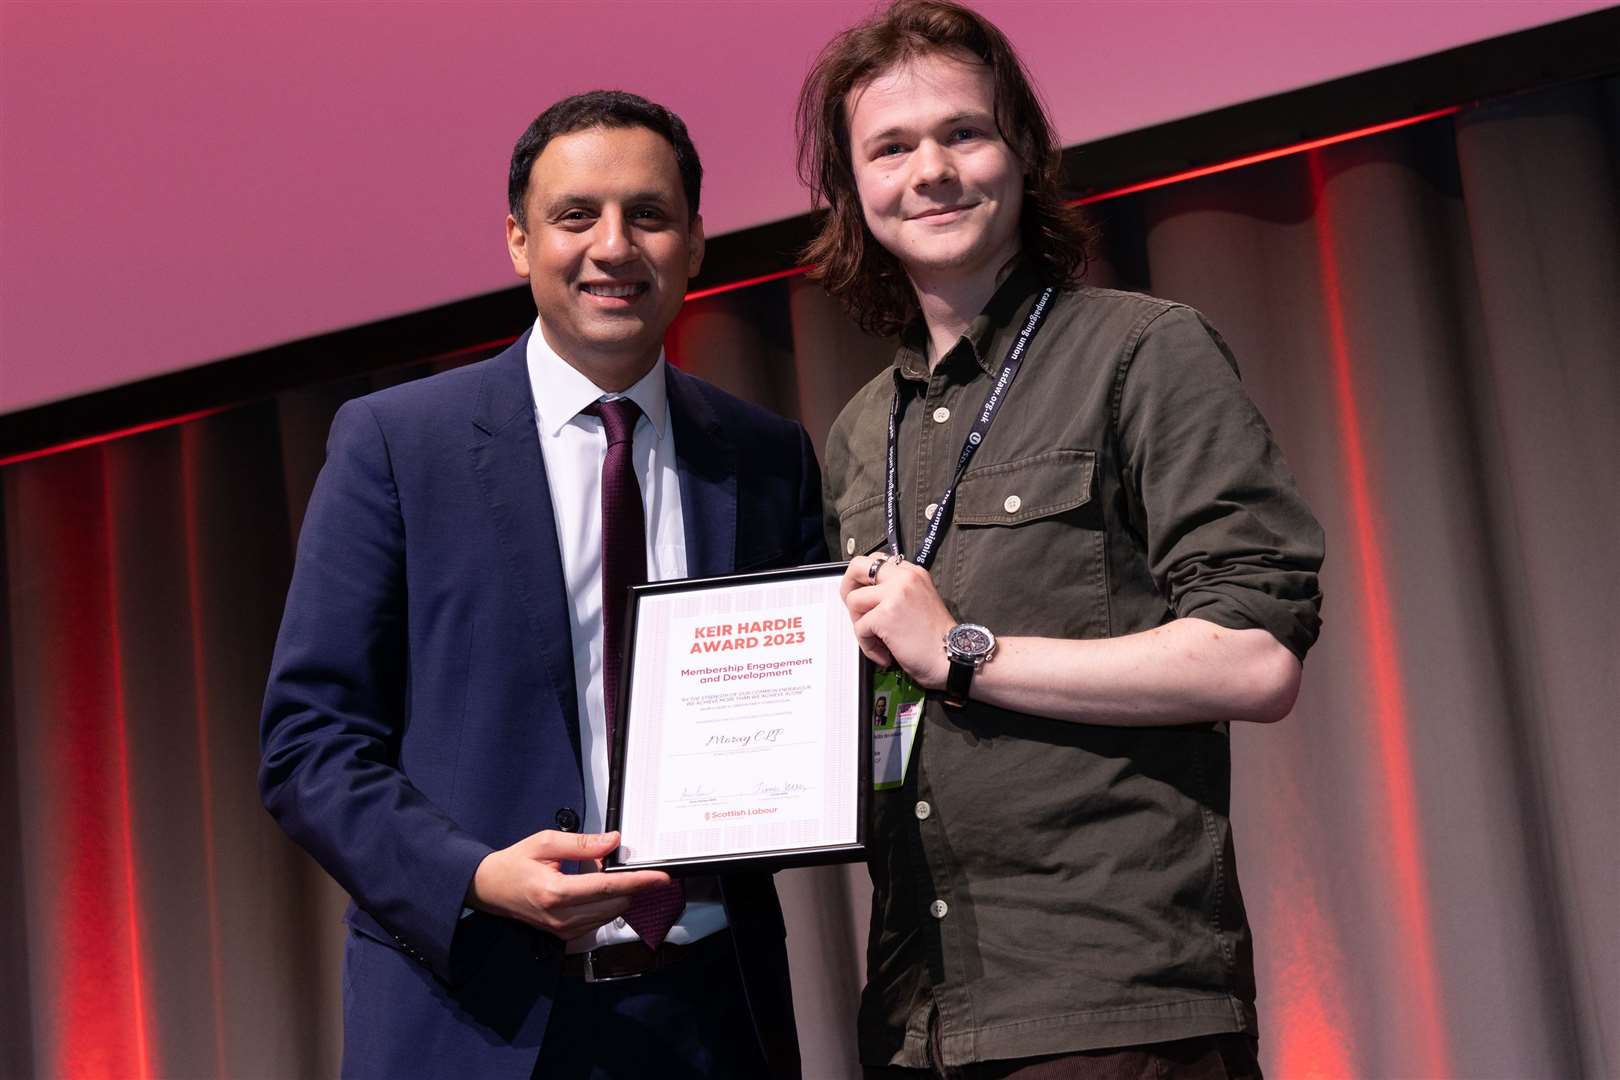 Councillor Ben Williams accepted the award from Scottish Labour Party leader Anas Sarwar. Picture: Gus Campbell